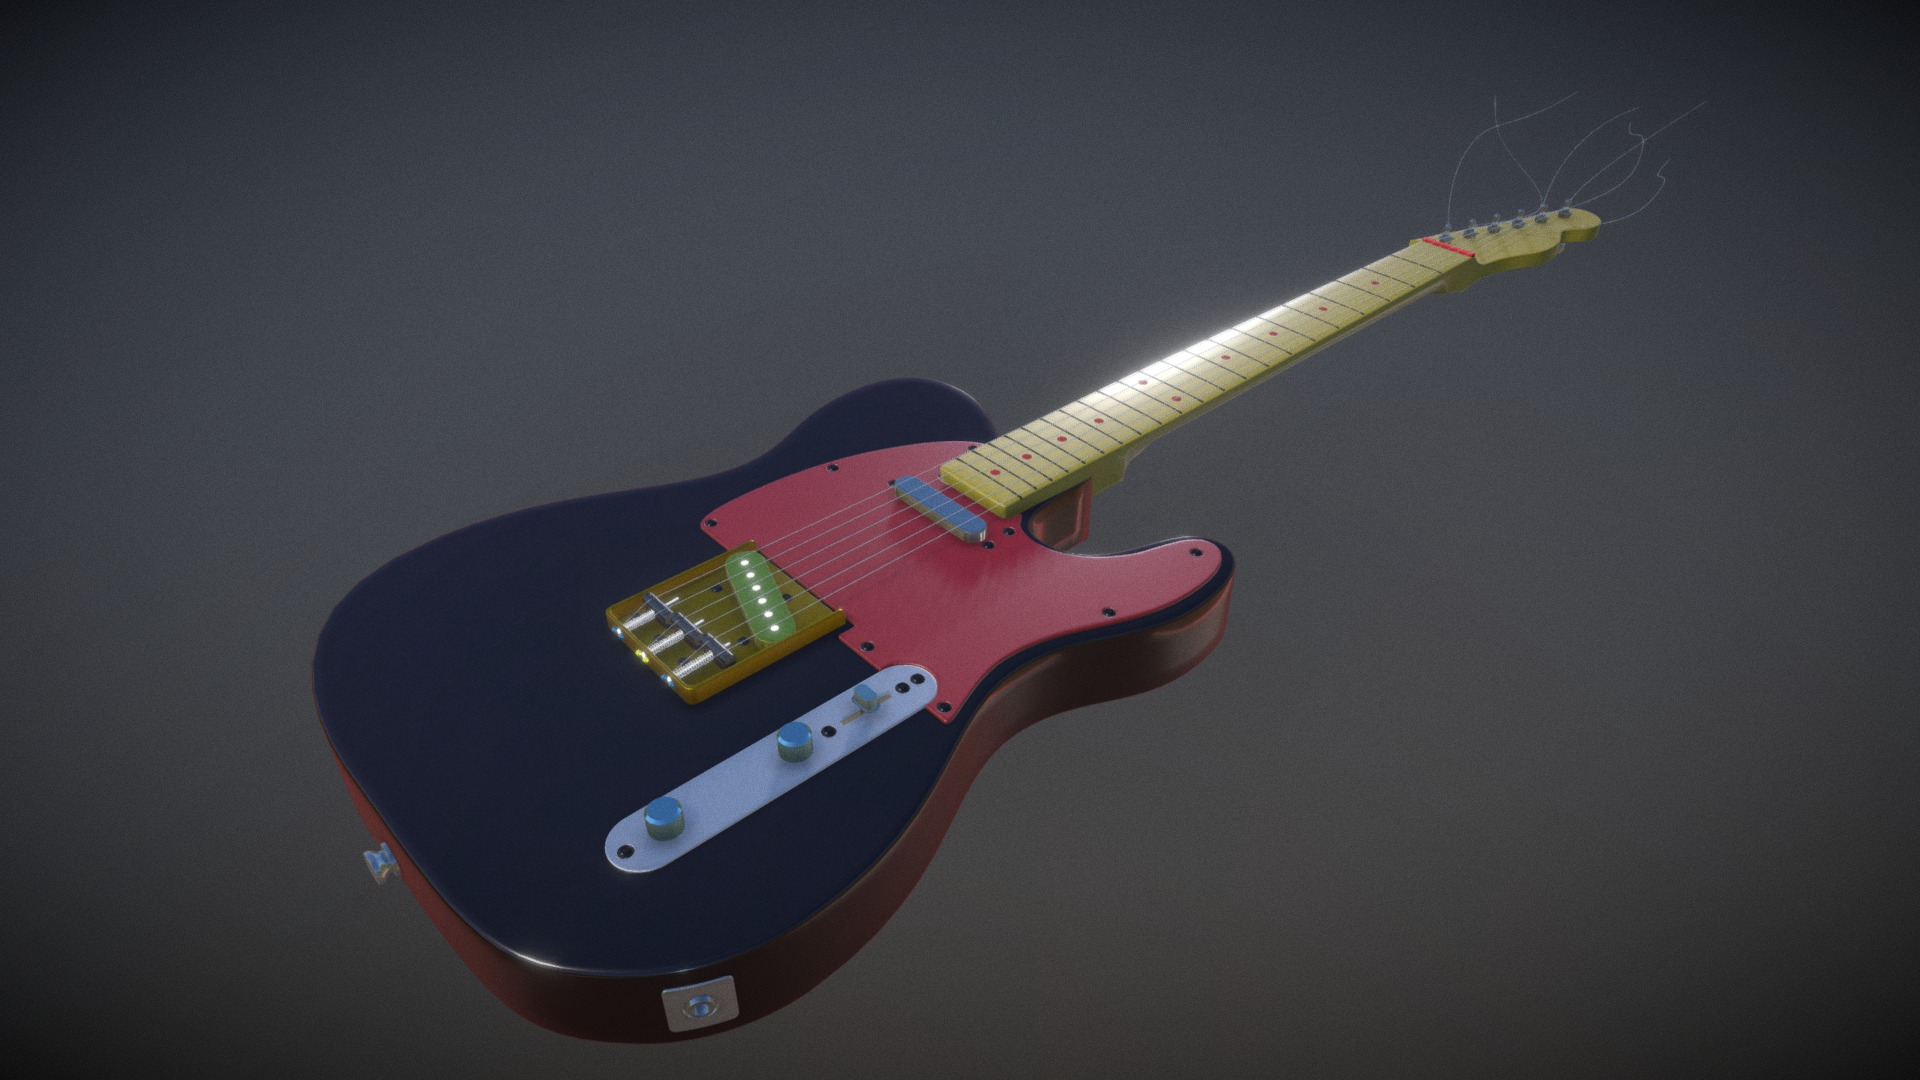 3D model Fender Guitar - This is a 3D model of the Fender Guitar. The 3D model is about a guitar with a blue and red neck.